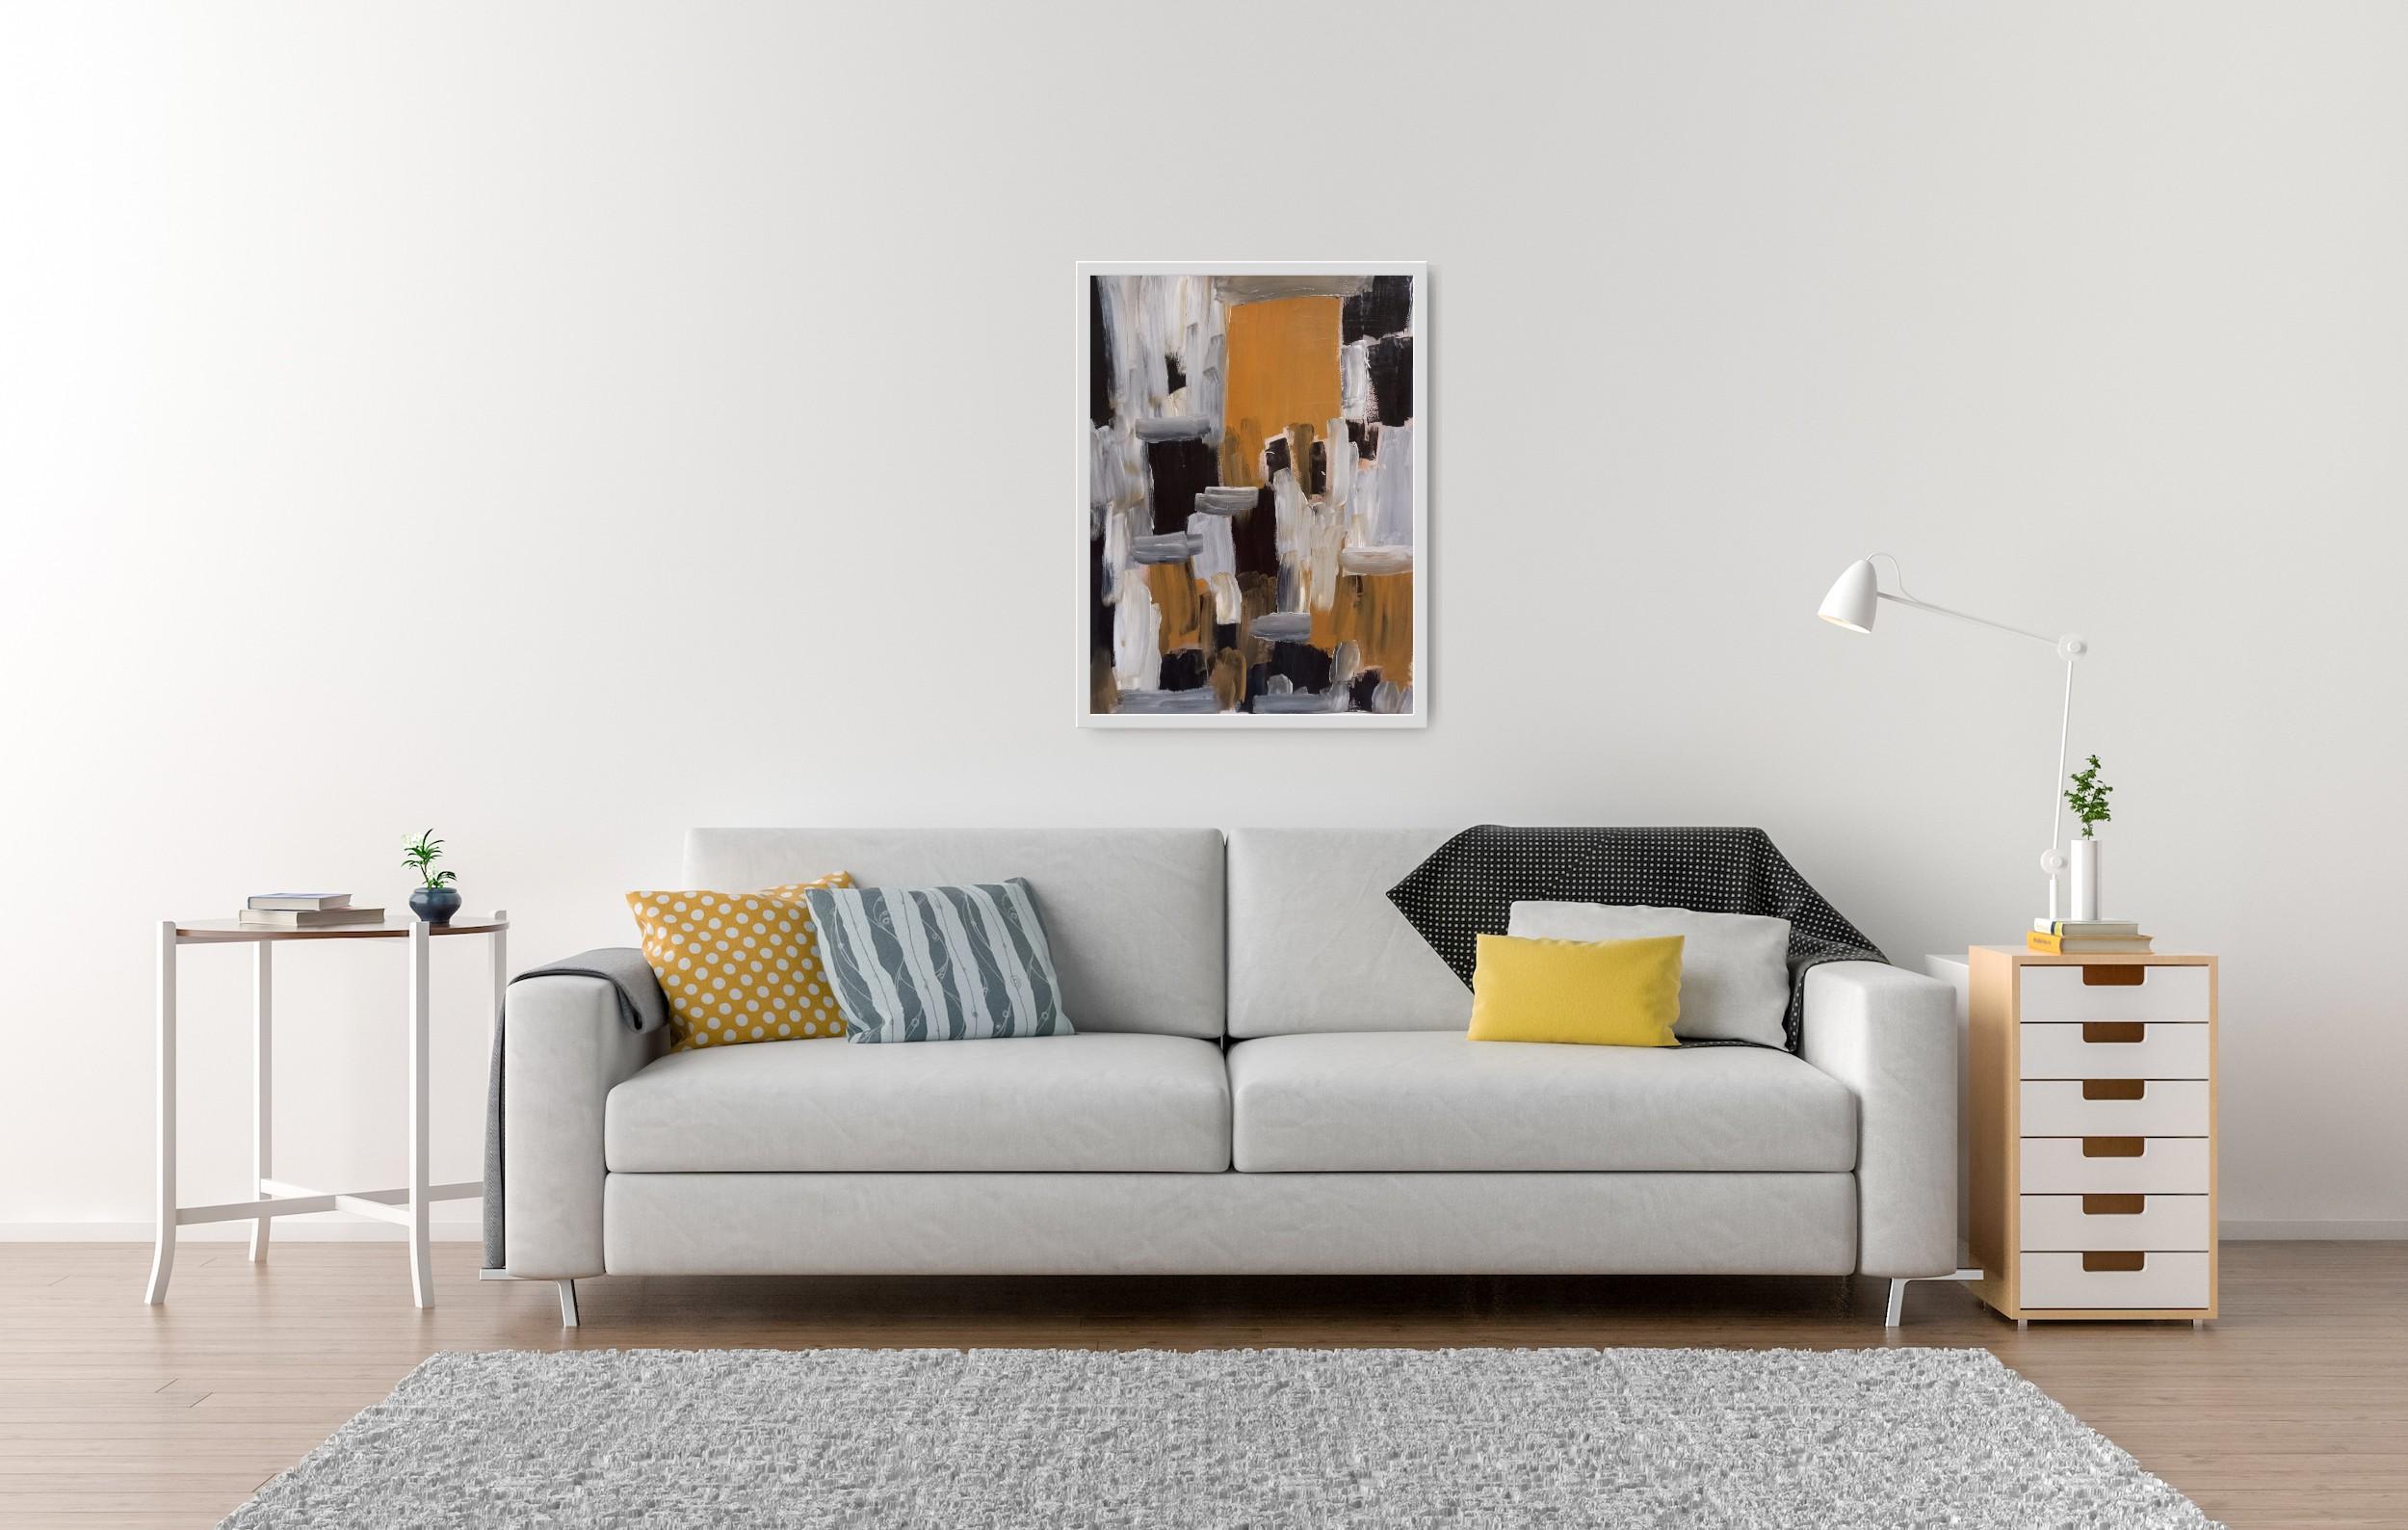 This artwork makes part of my small collection of abstract paintings created in various soft neutral earth tones. Main colors of this collection are grey, brown, suede, black, white. 

This collection was created for contemporary interior decoration